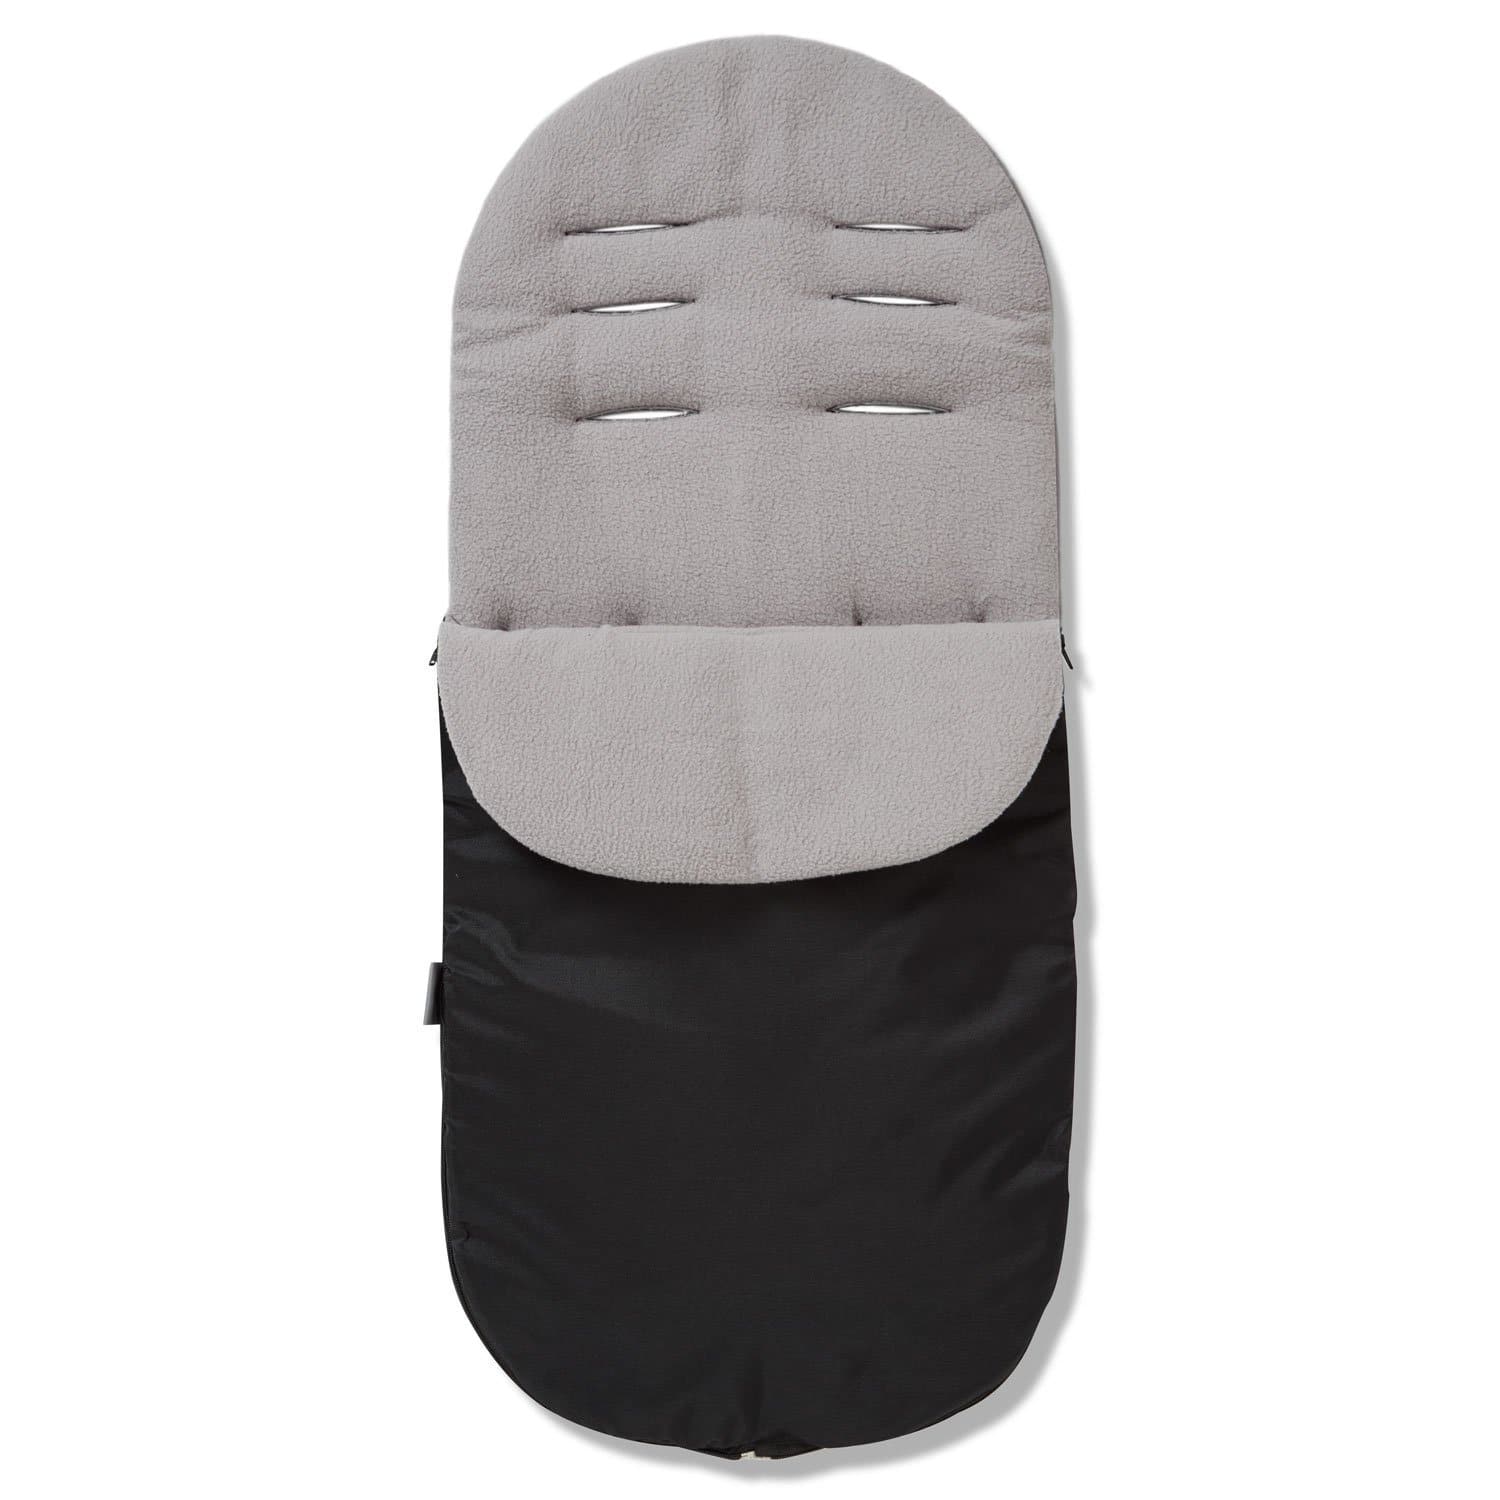 Footmuff / Cosy Toes Compatible with Formula - Grey / Fits All Models | For Your Little One